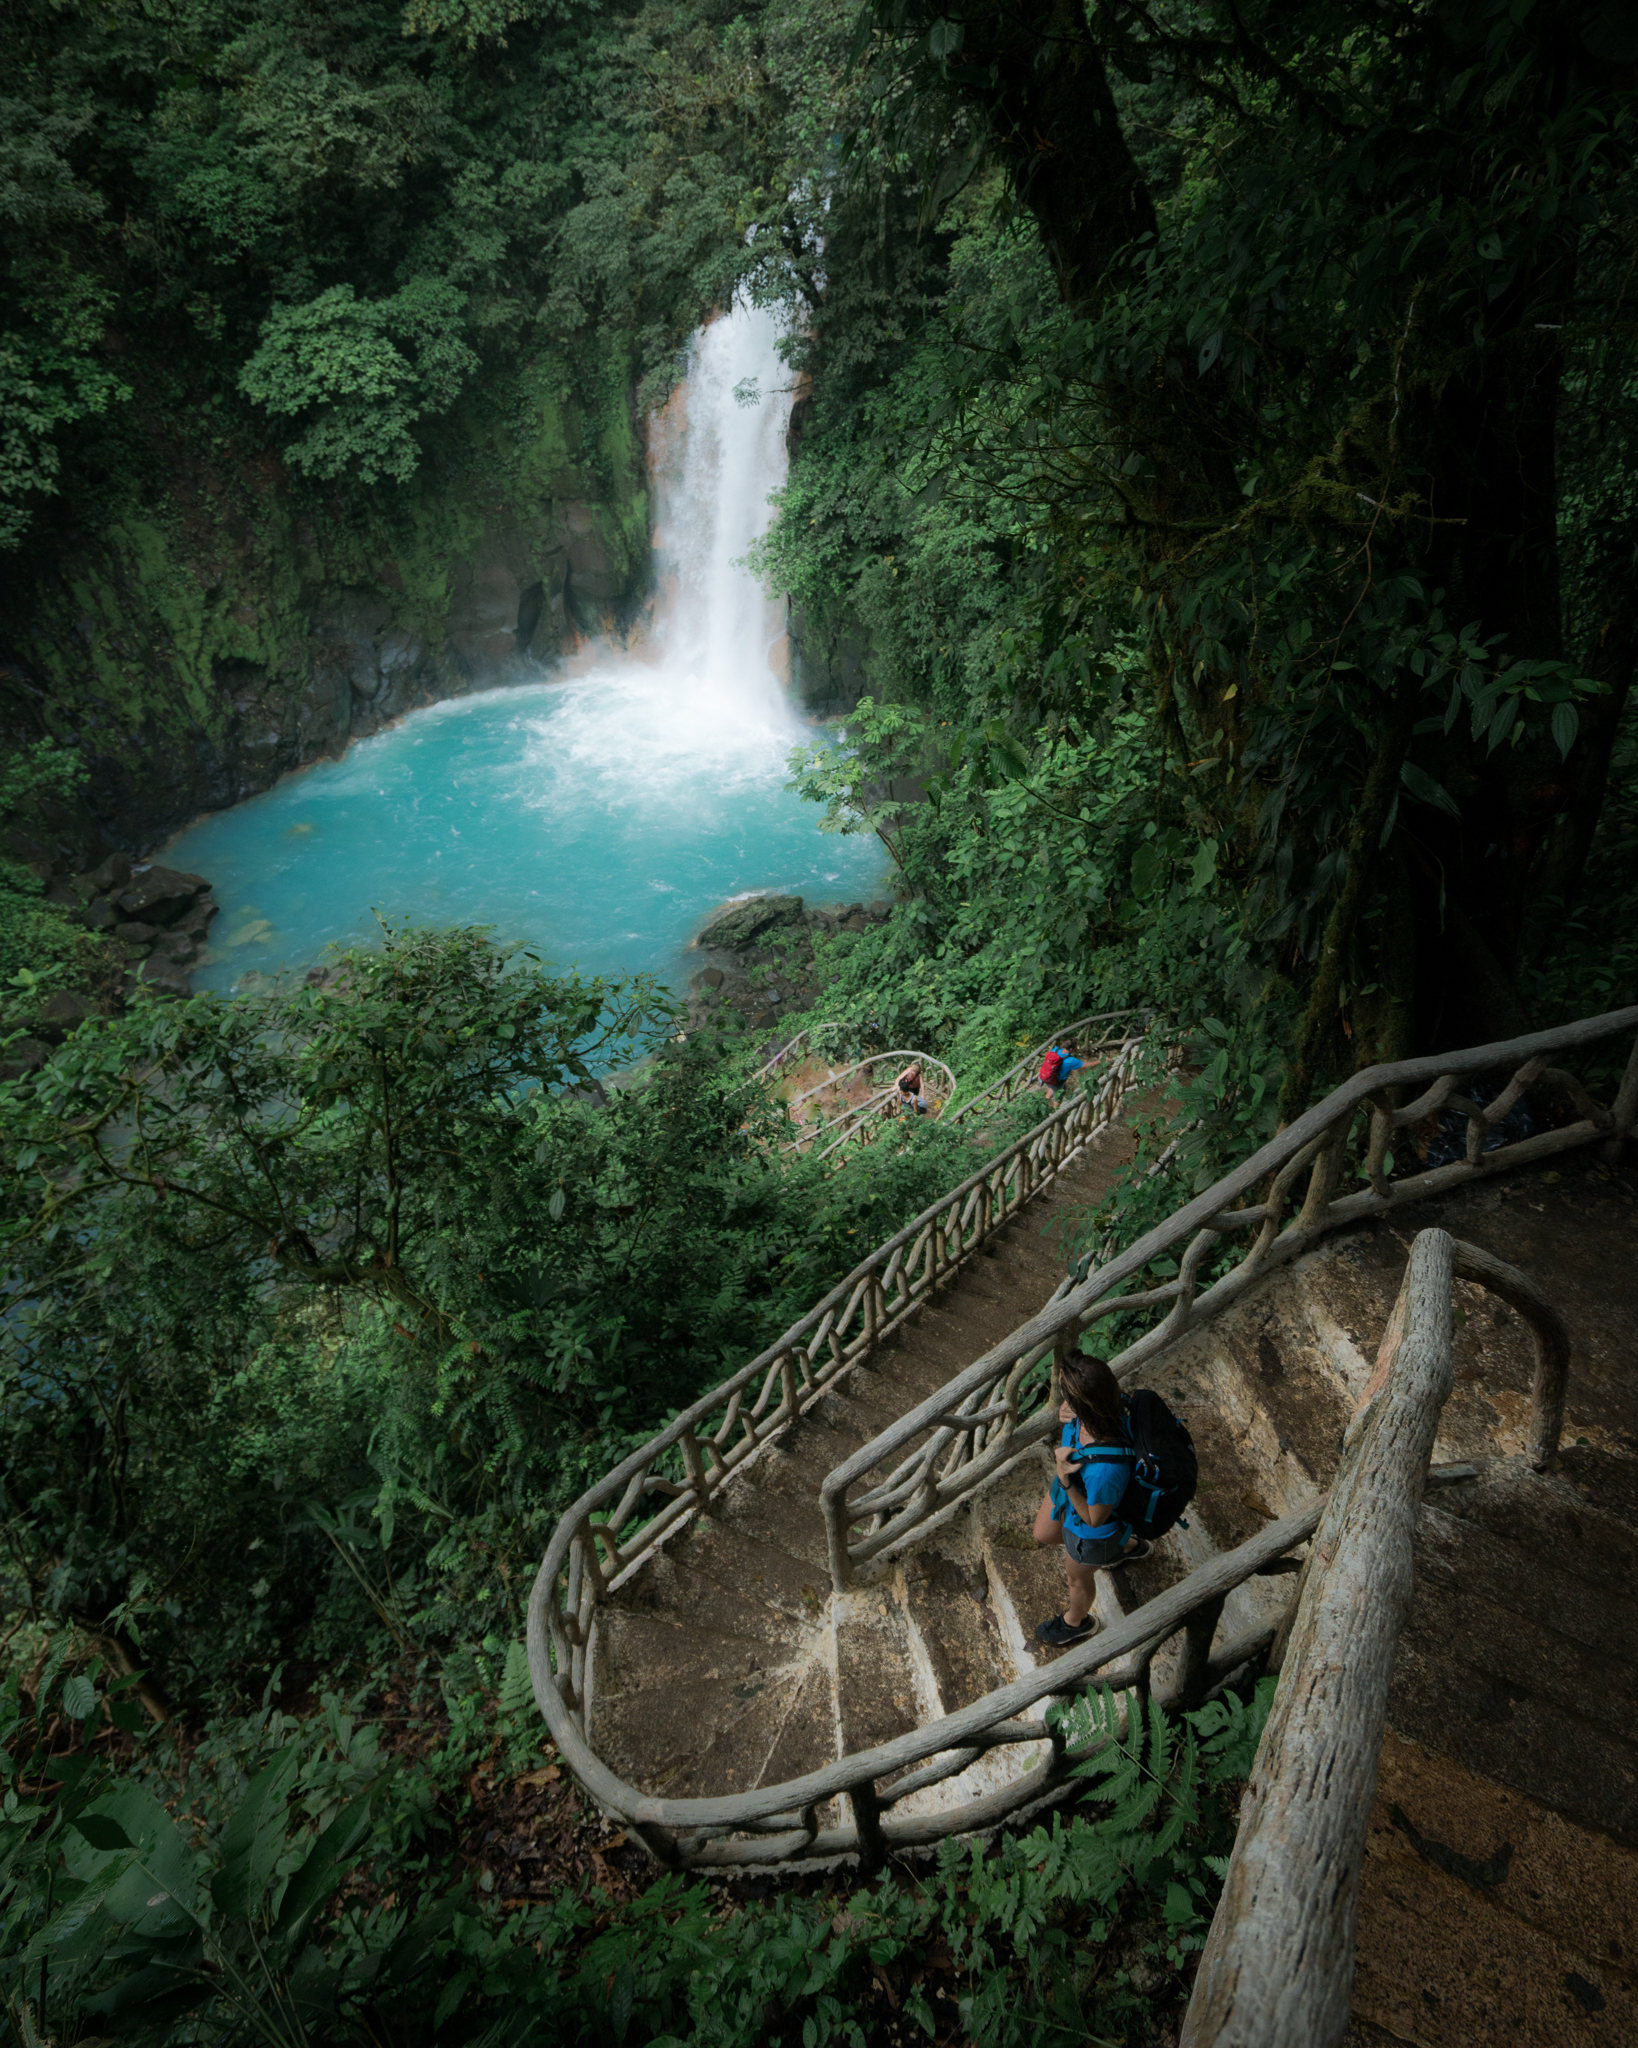 The stunning staircase down to the base of the waterfall at Tenorio Volcano National Park, Costa Rica.